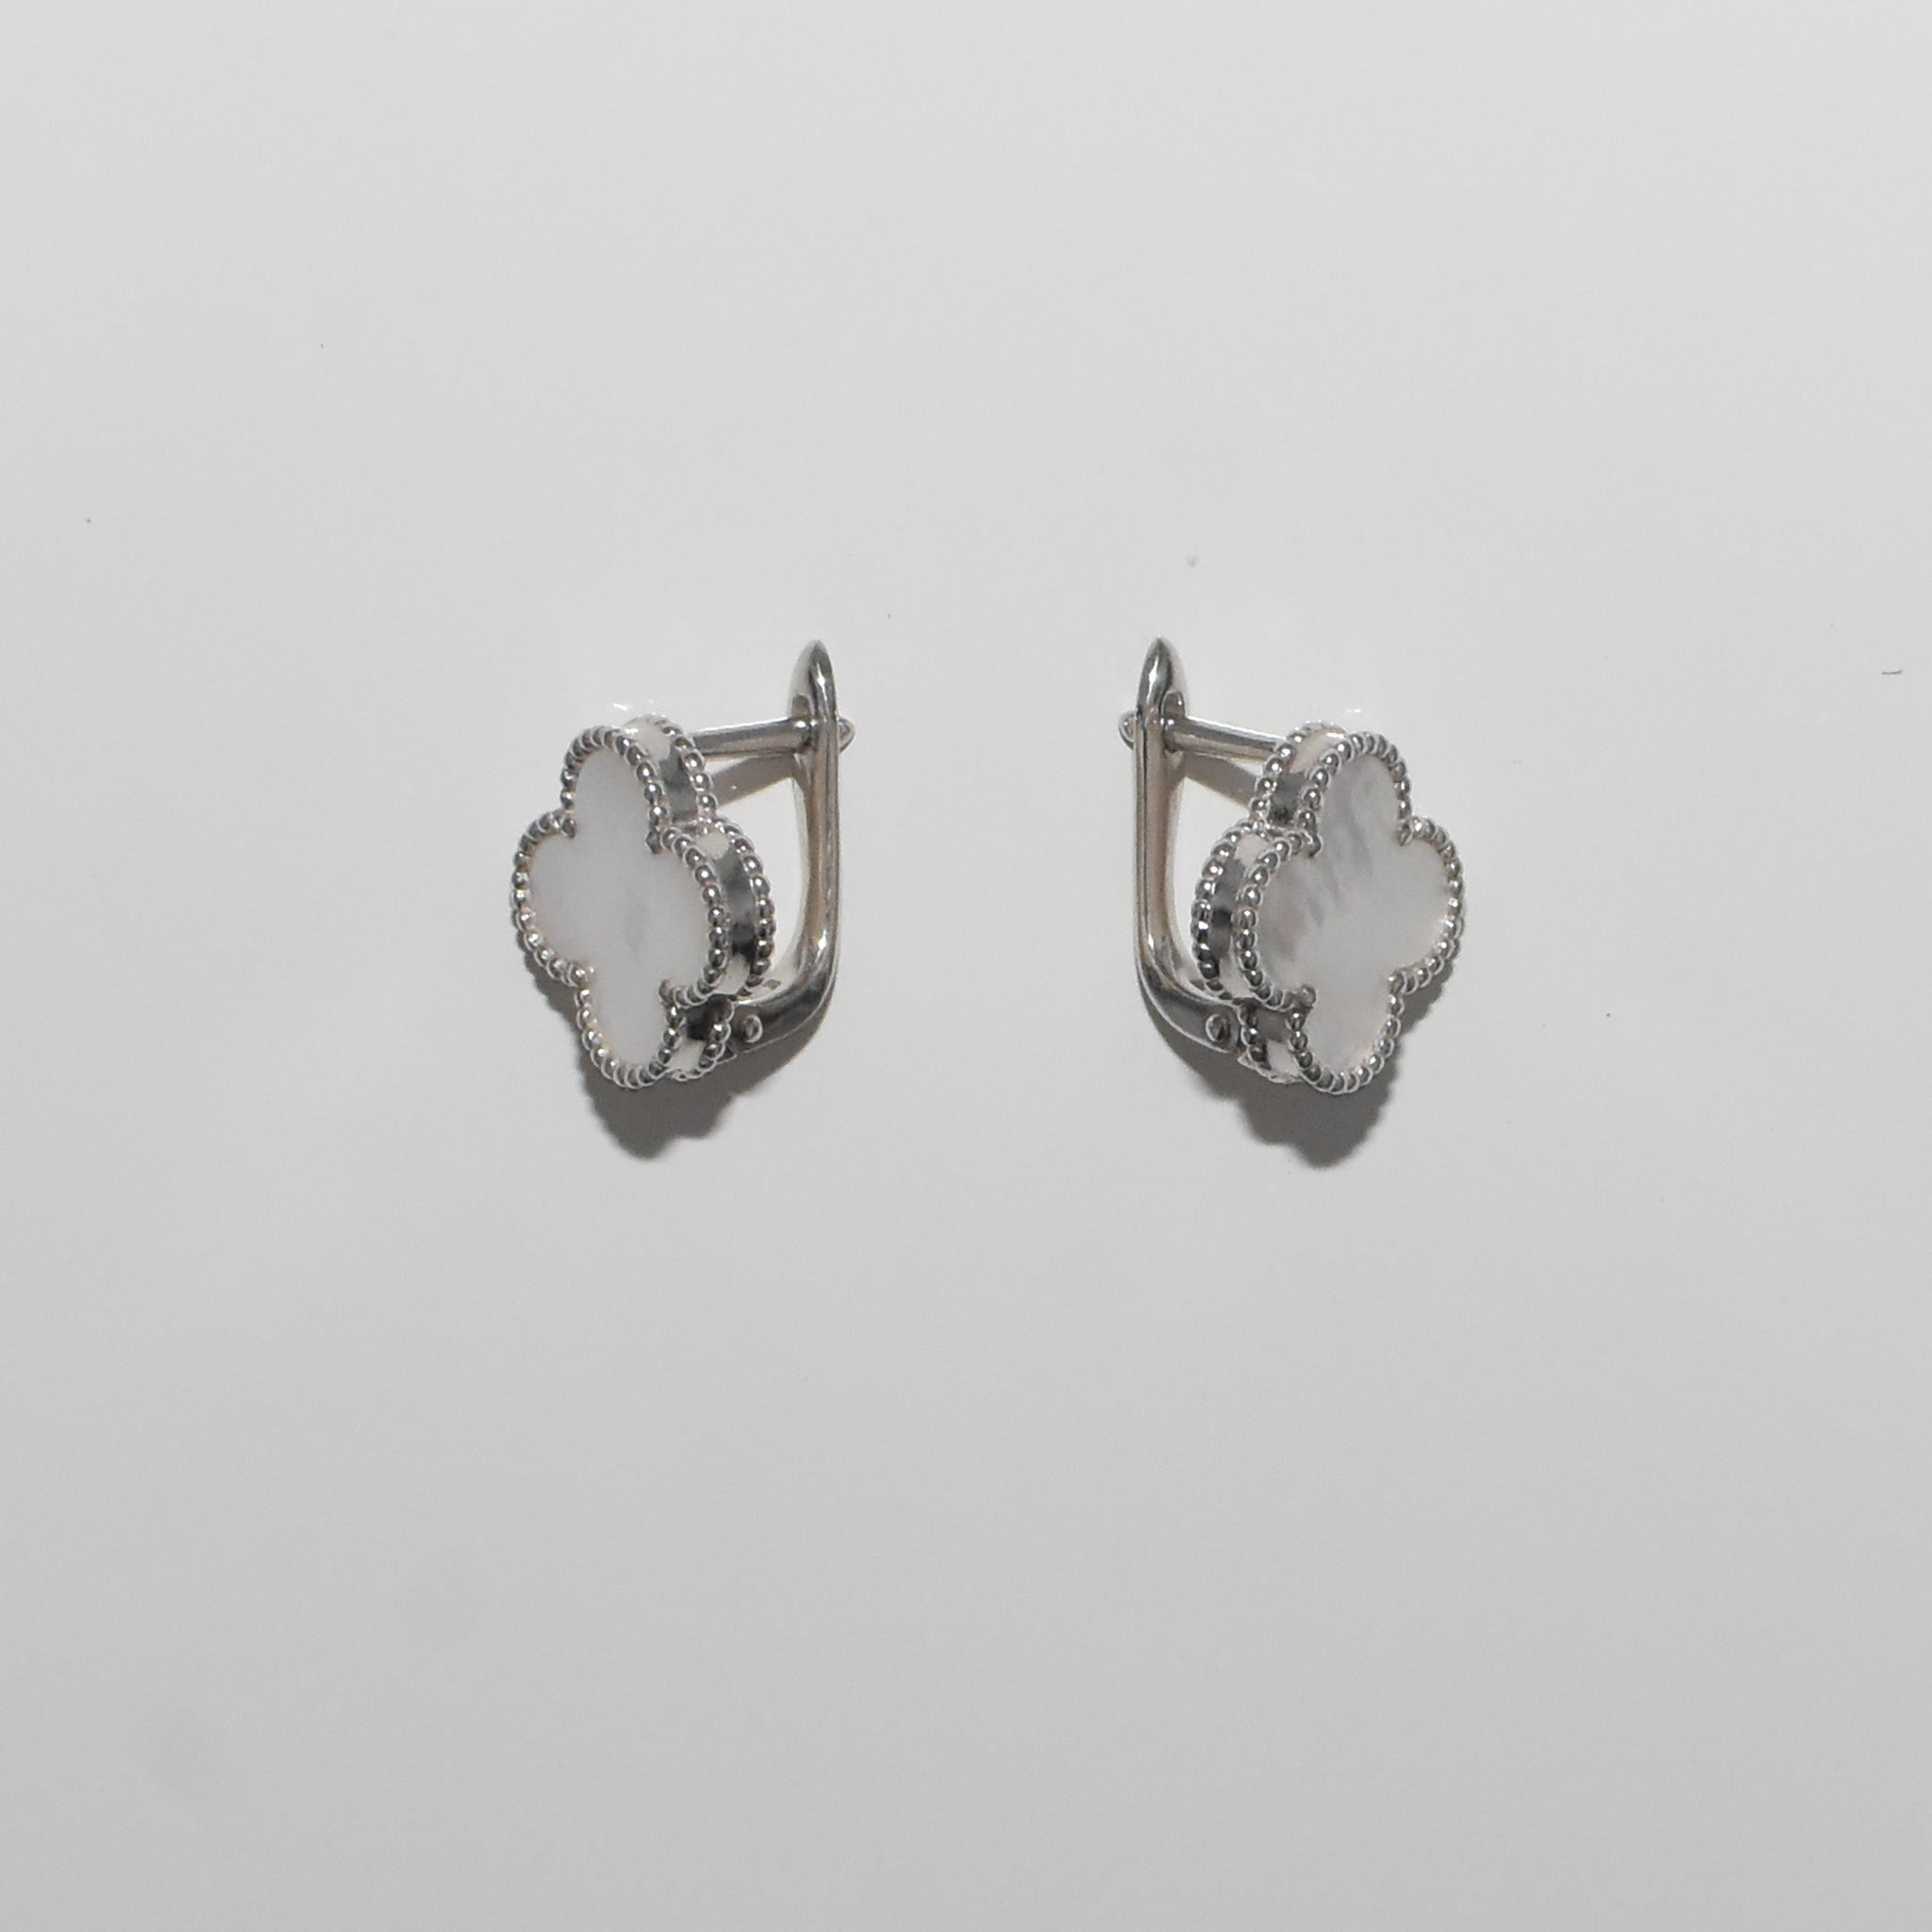 Four Leaf Clover Mother of Pearl Earrings Sterling Silver